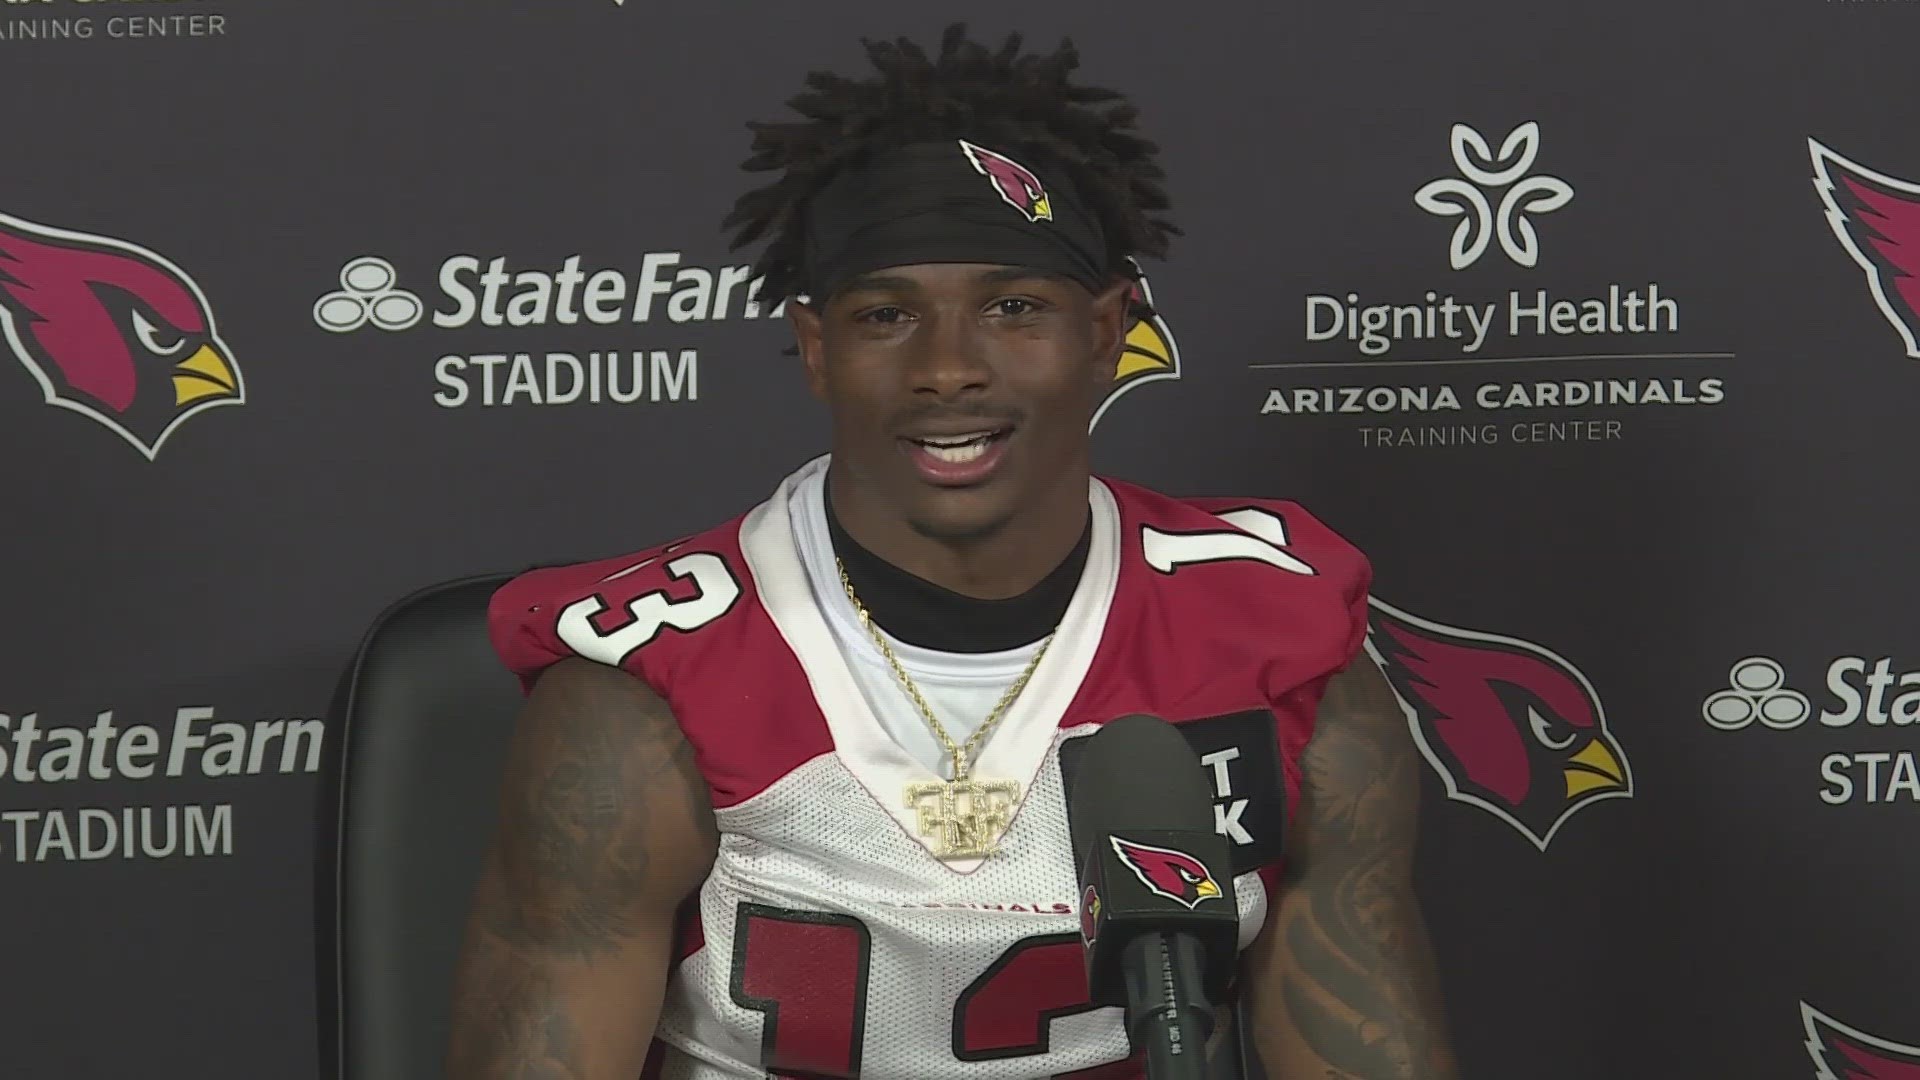 Clark says he chose to attend his graduation and miss out on a few days of rookie camp with the Cards. He says he wanted to make his mother proud.